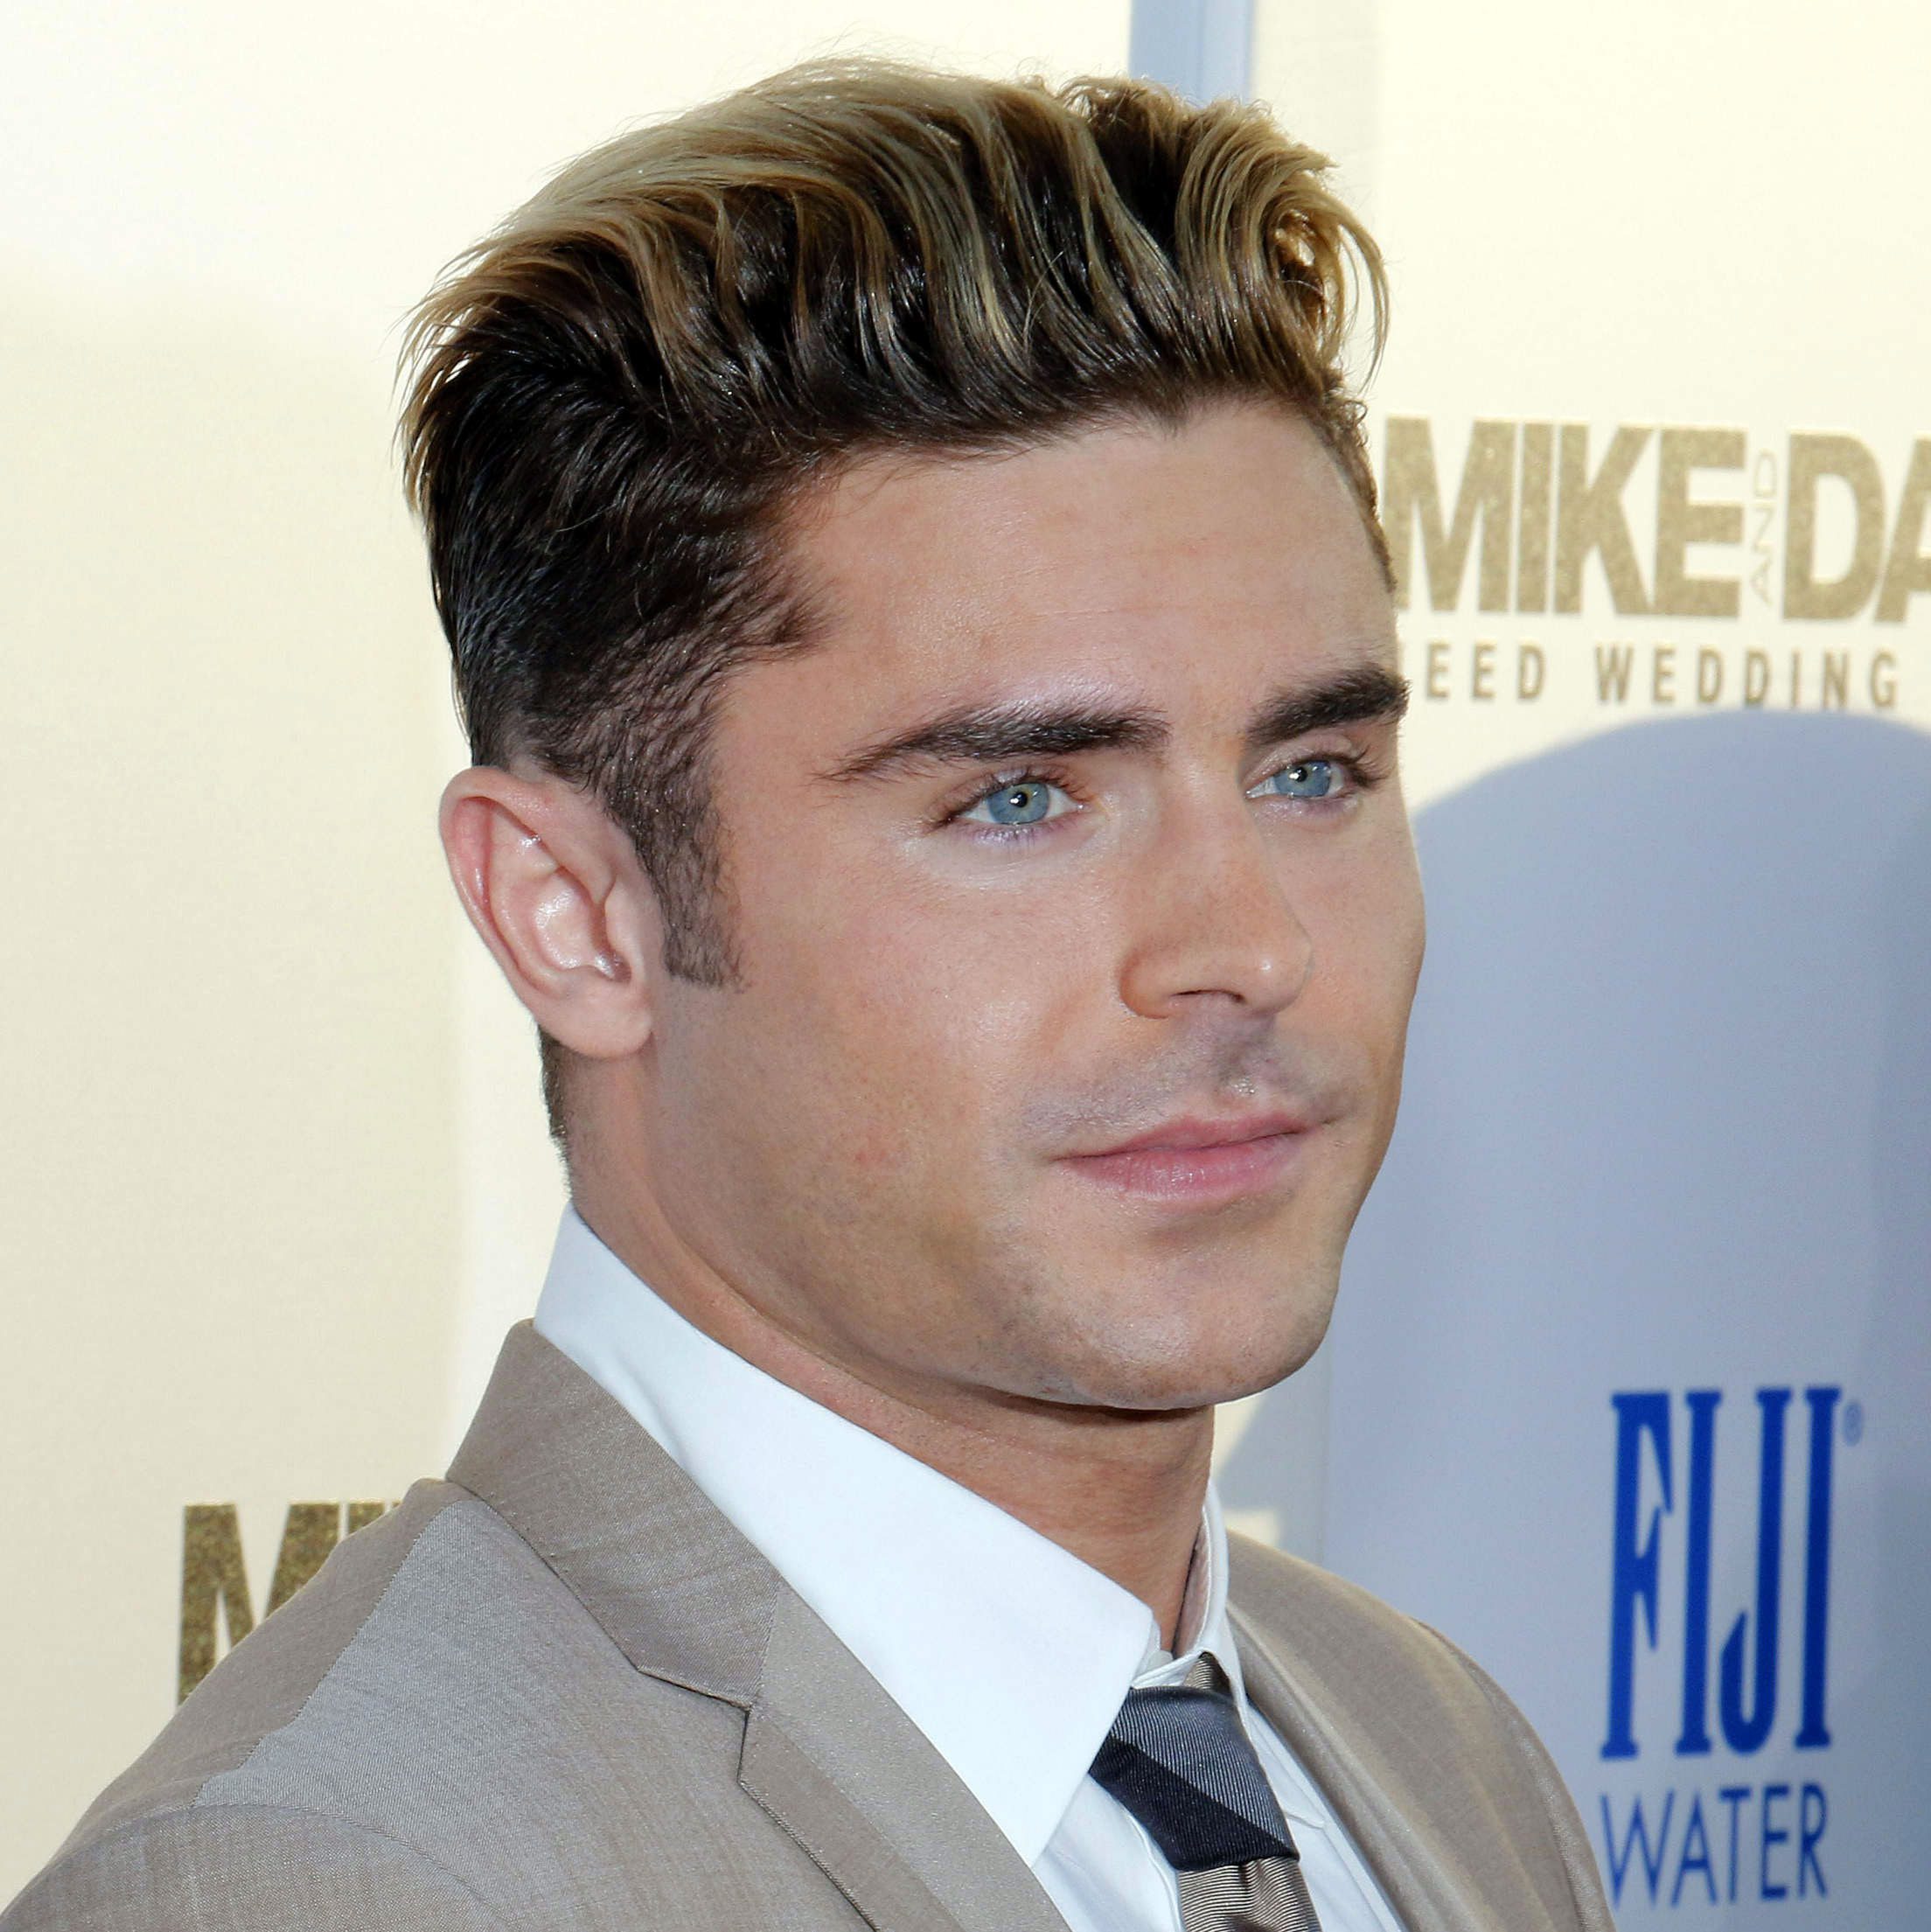 Zac Efron's Fury Inspired Disconnected Undercut-1-1